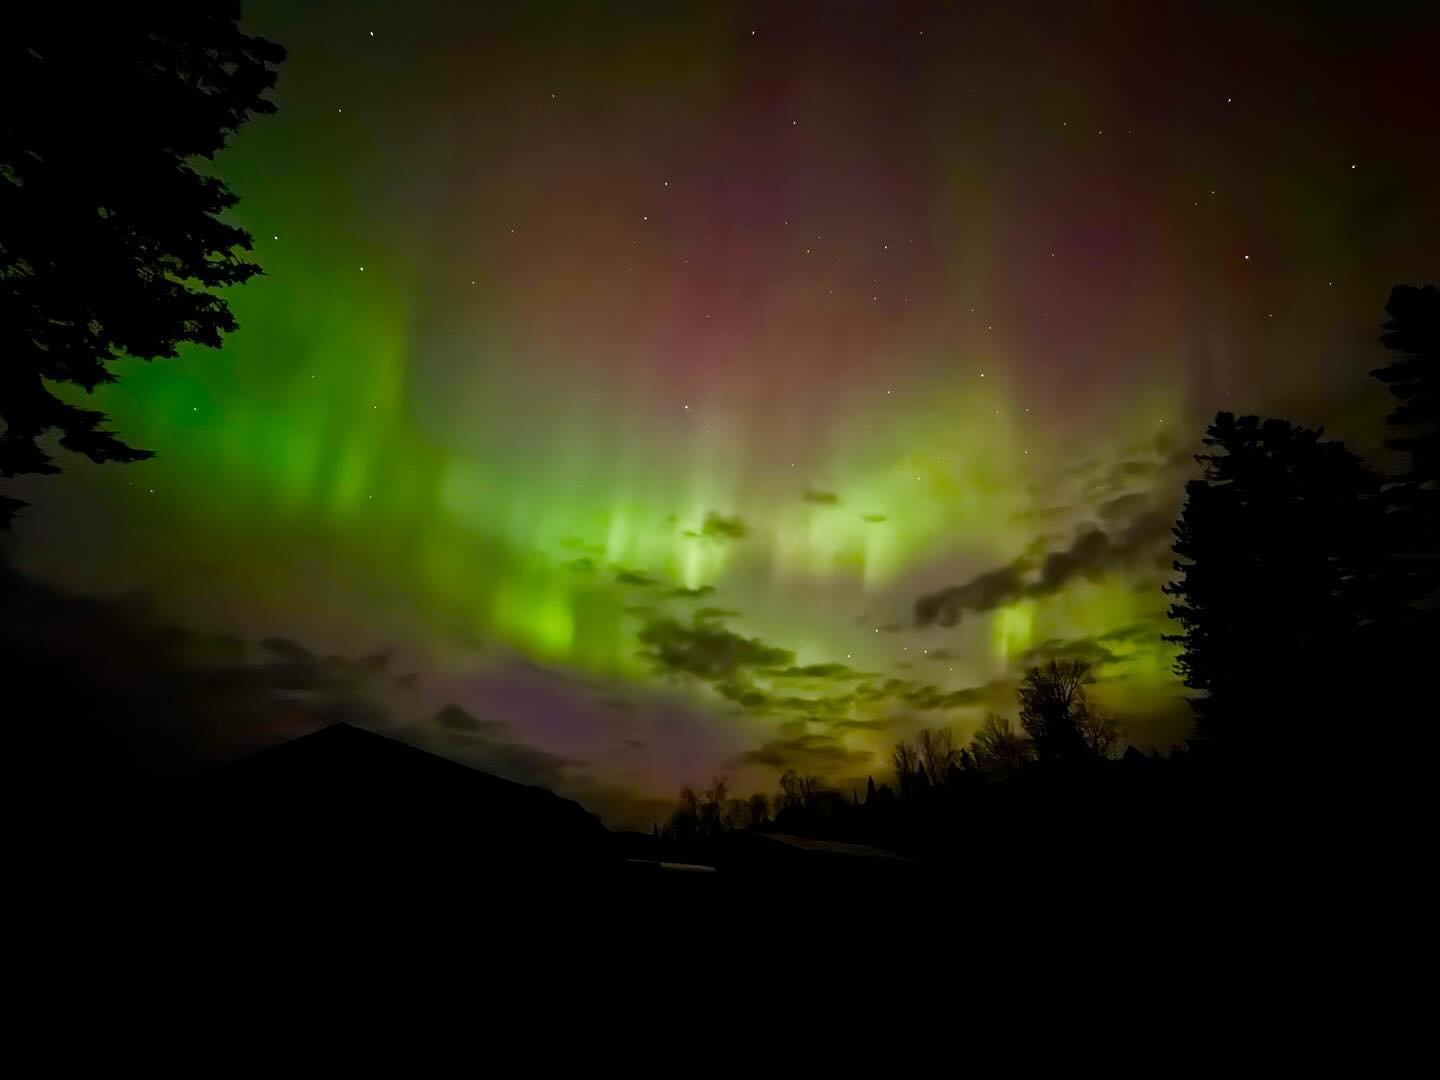 I keep saying, ah, that&rsquo;s it. Now I can go to sleep. But then I go out and it&rsquo;s even better than last time. 

#aurora
#auroraborealis 
#northernlights 
#vermontskies
#nightsky
#northernsky
#broadforkvt